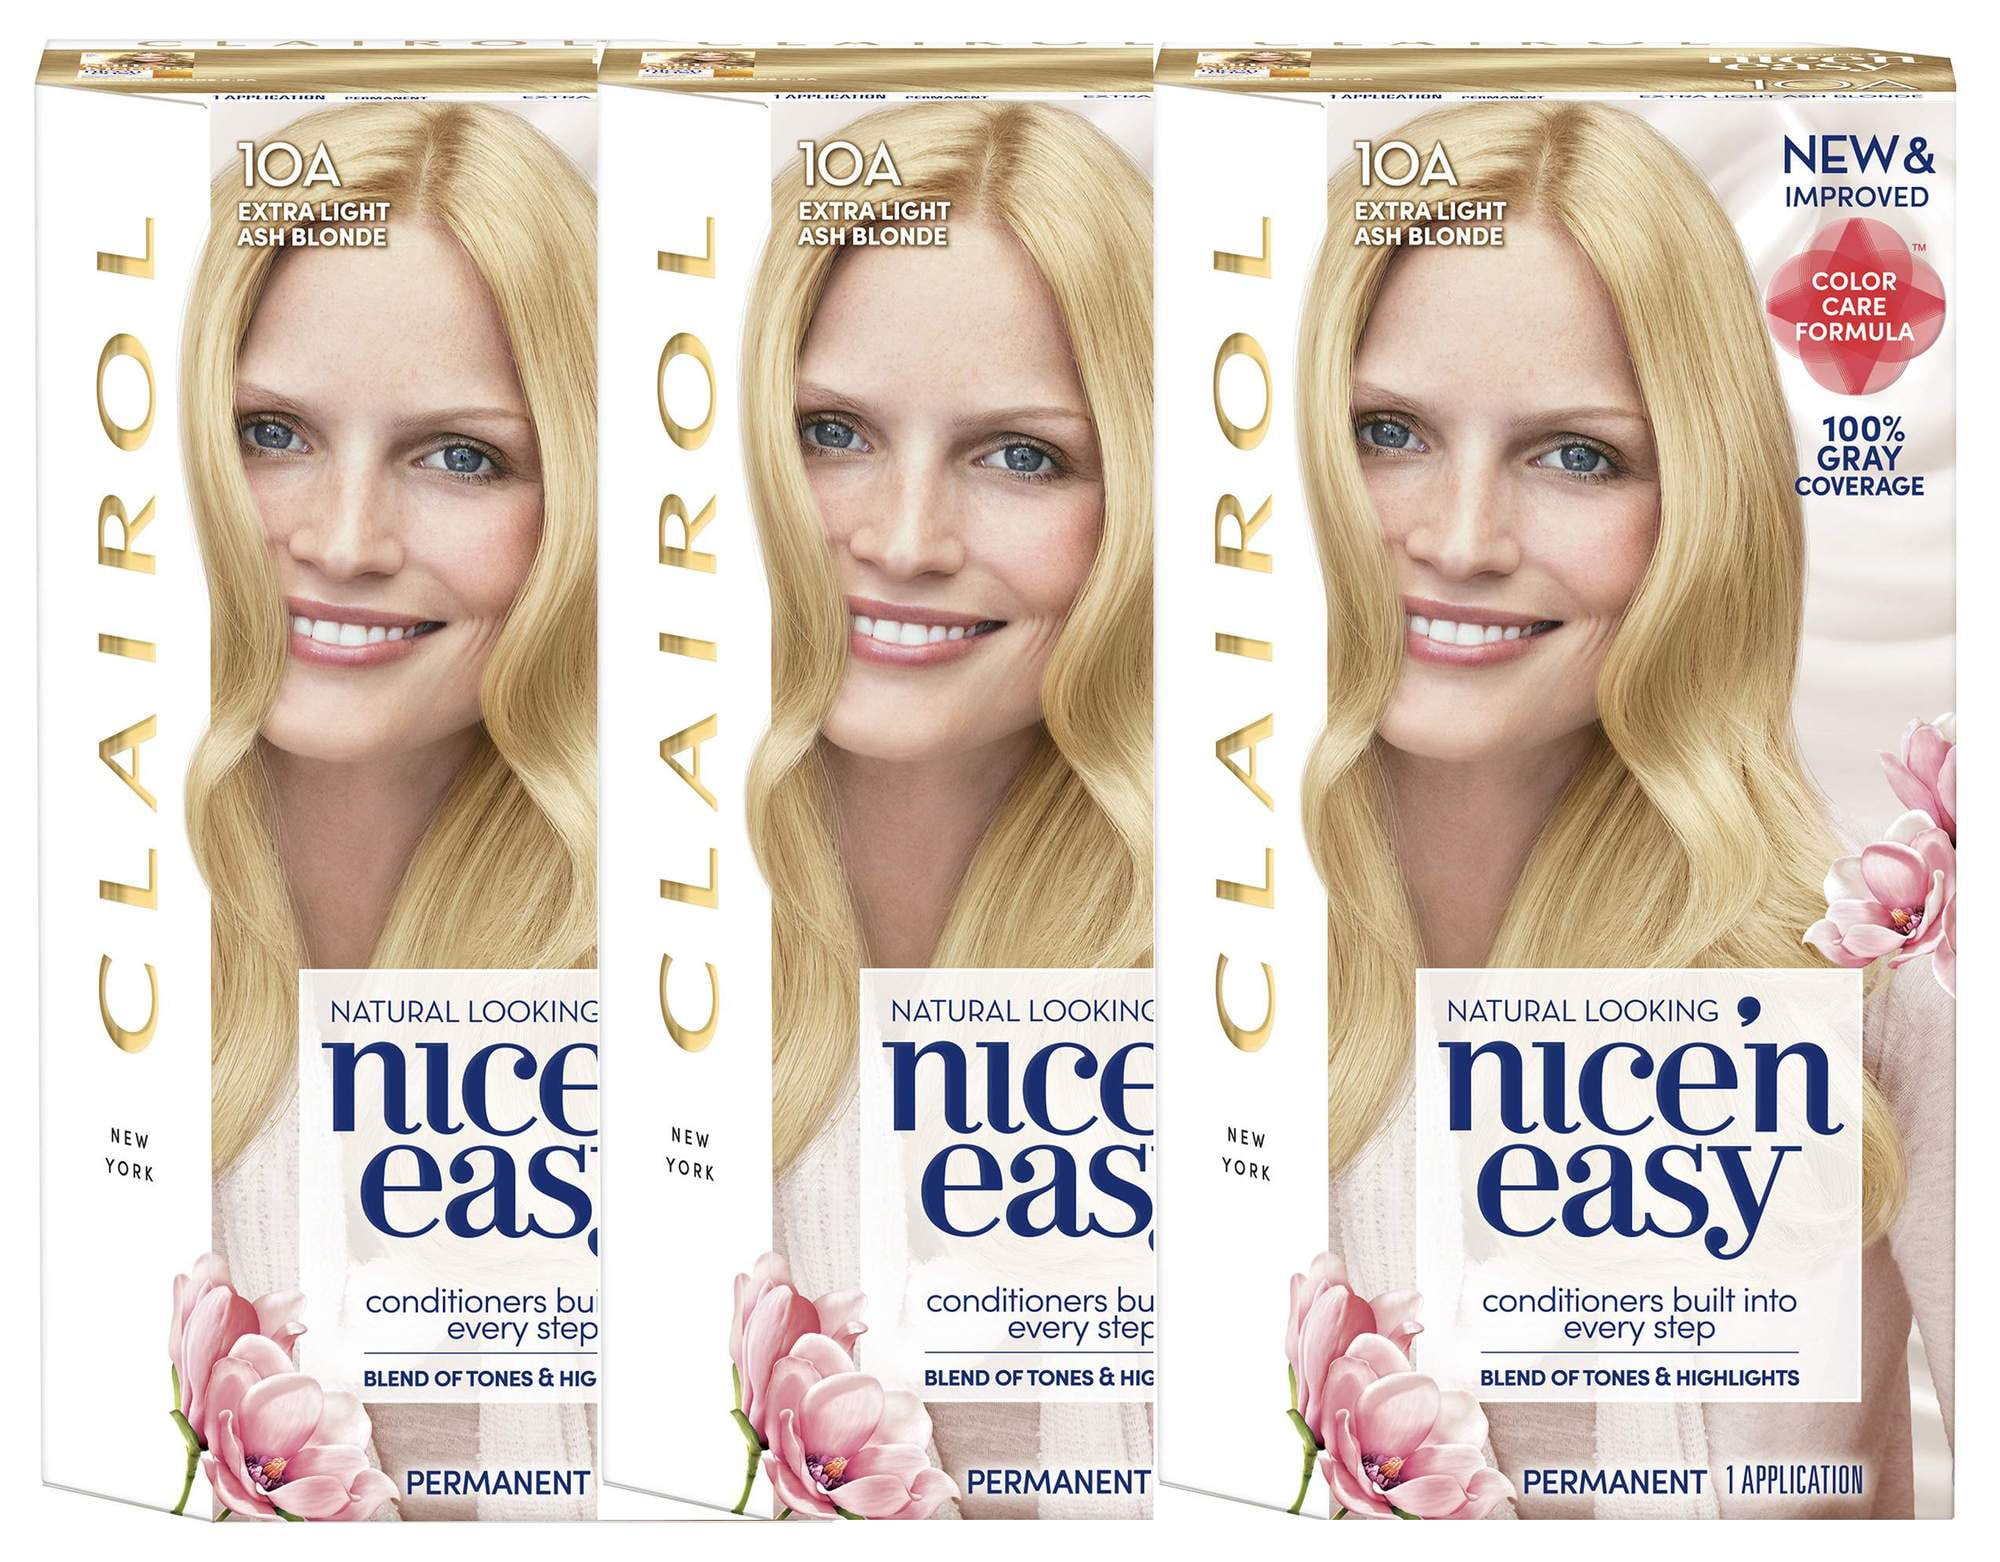 3. Clairol Nice'n Easy Permanent Hair Color, 9A Light Ash Blonde, Pack of 1 - wide 6